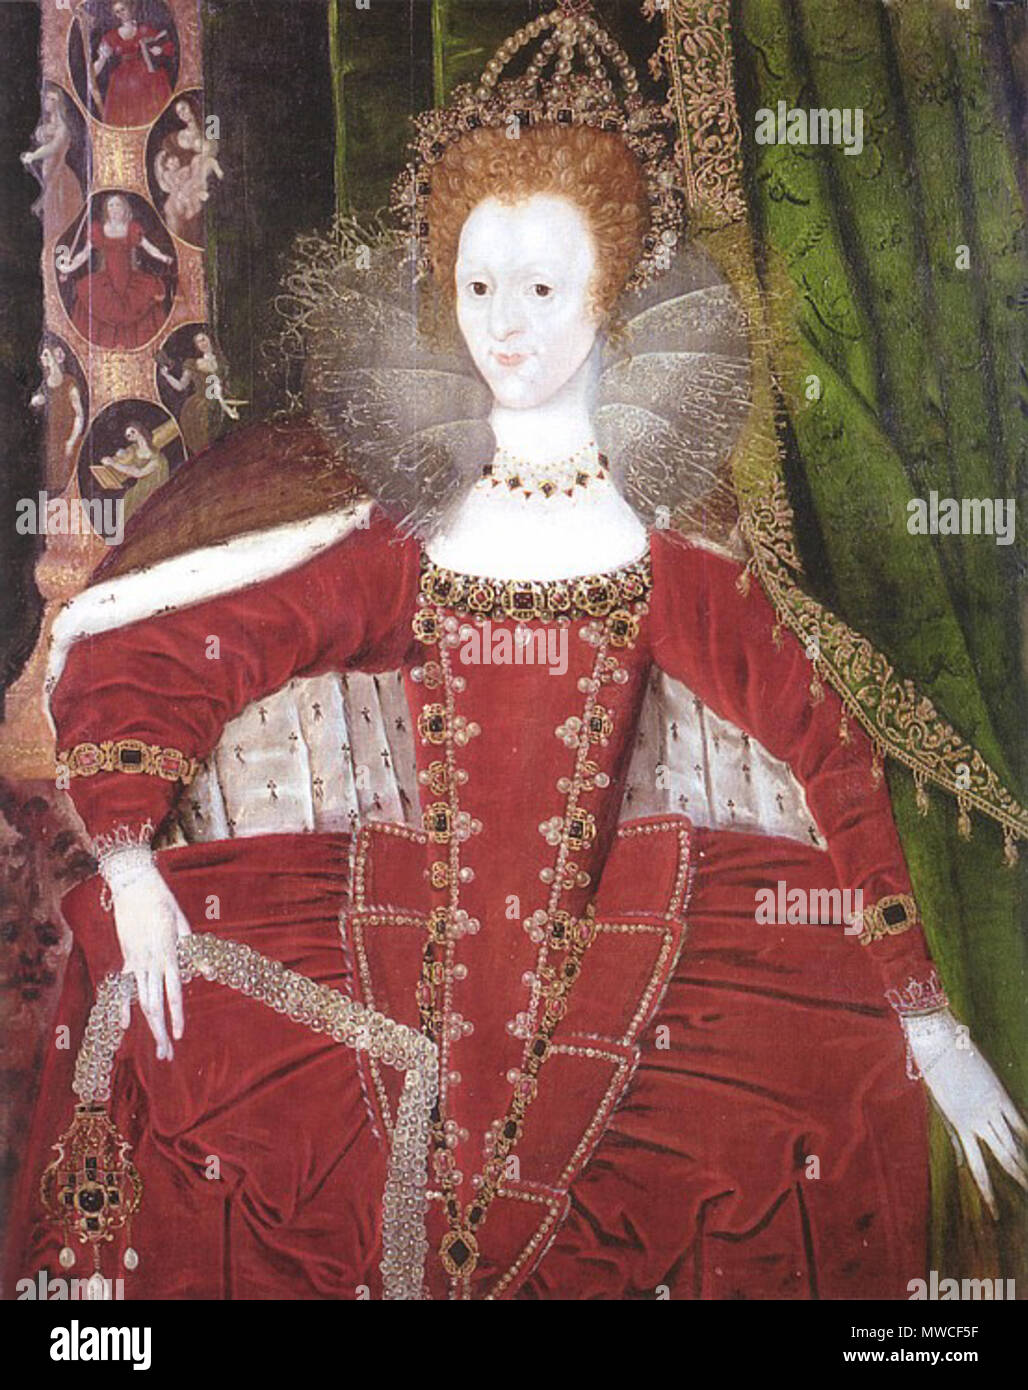 . Portrait of Elizabeth I of England in Parliament robes with a column decorate with medallions representing the cardinal virtues of Justice, Prudence, Temperance and Fortitude and theological virtues of Faith, Hope and Charity. circa 1595. Unknown 184 Elizabeth I Parliament Robes with Virtues Stock Photo